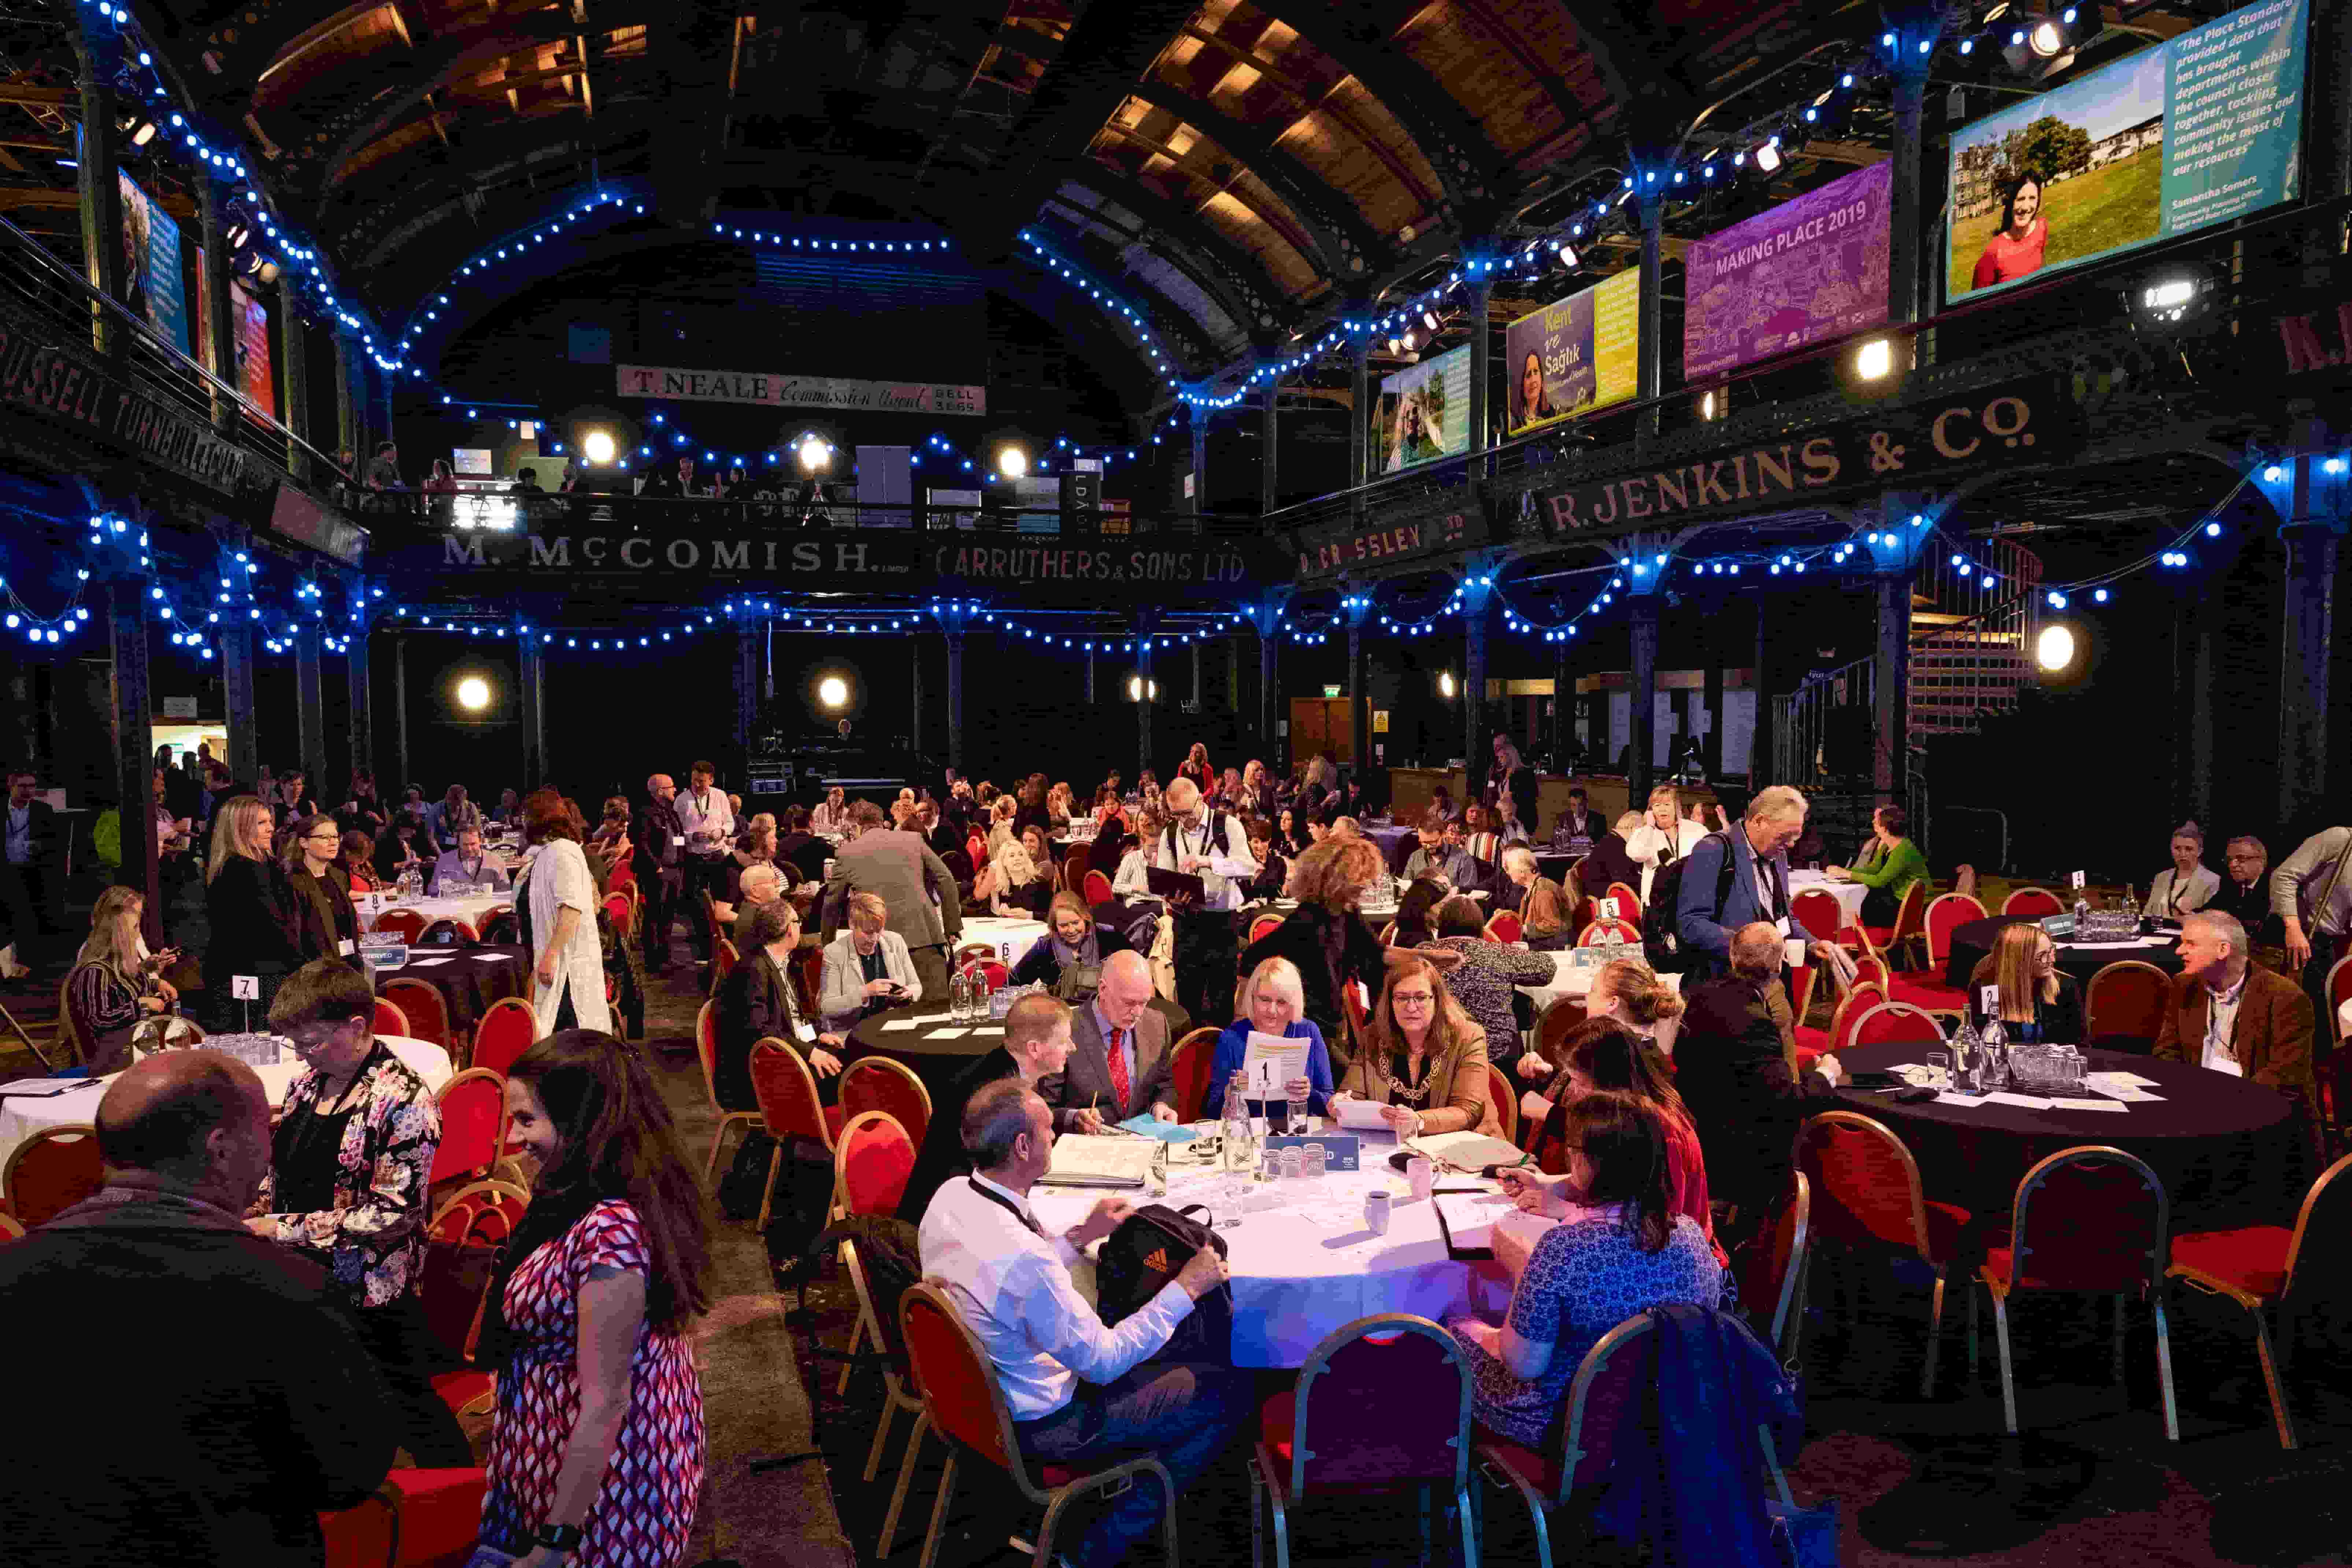 A conference taking place in a large room where the delegates are sitting around round tables with white table cloths and coloured exhibition panels hang from the balcony above